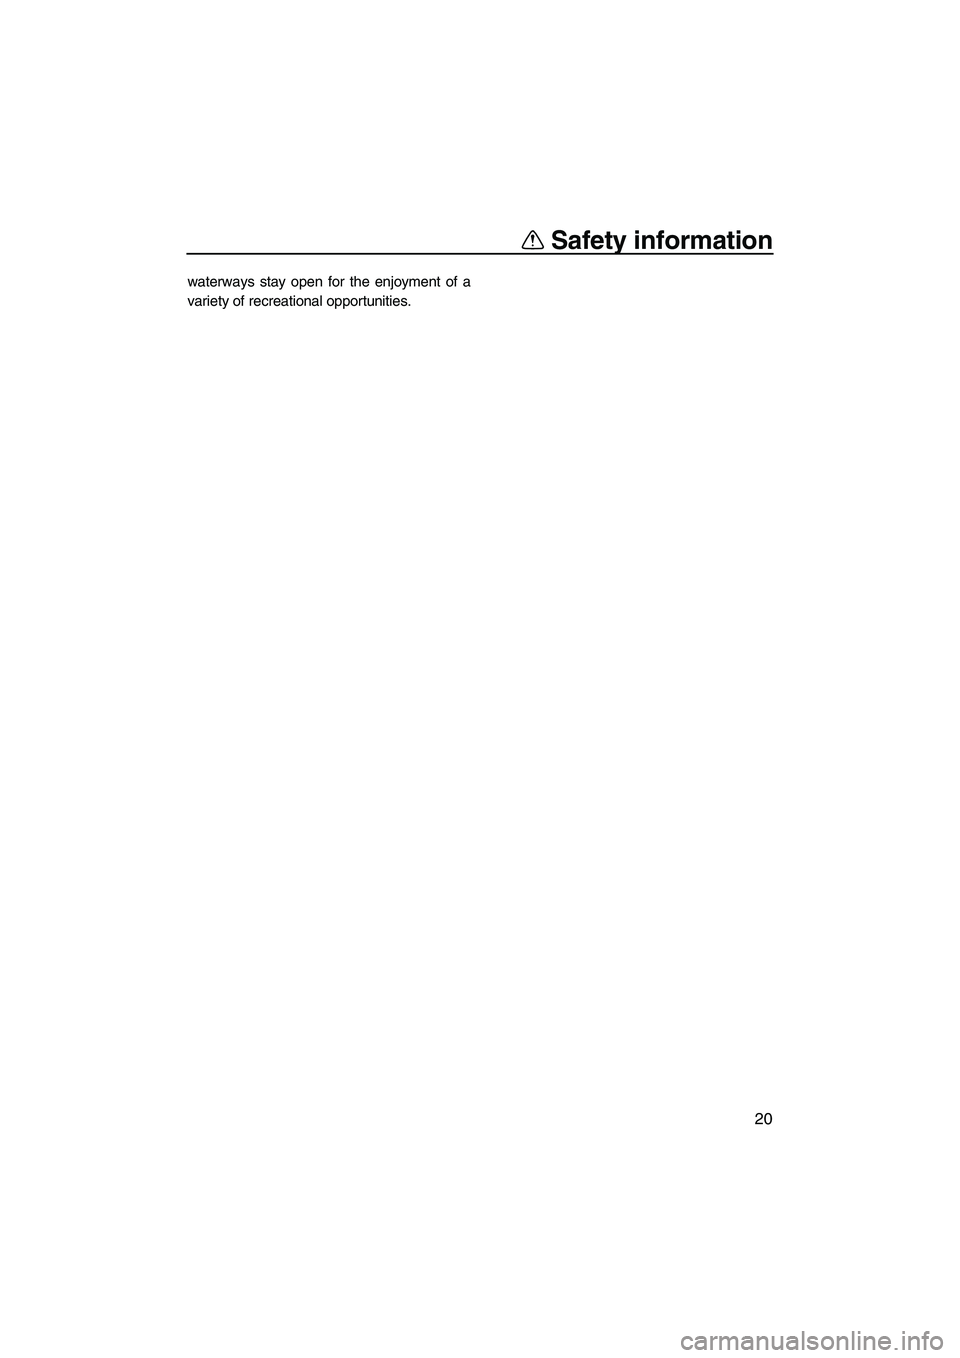 YAMAHA SVHO 2009 Owners Manual Safety information
20
waterways stay open for the enjoyment of a
variety of recreational opportunities.
UF1W71E0.book  Page 20  Tuesday, June 24, 2008  11:46 AM 